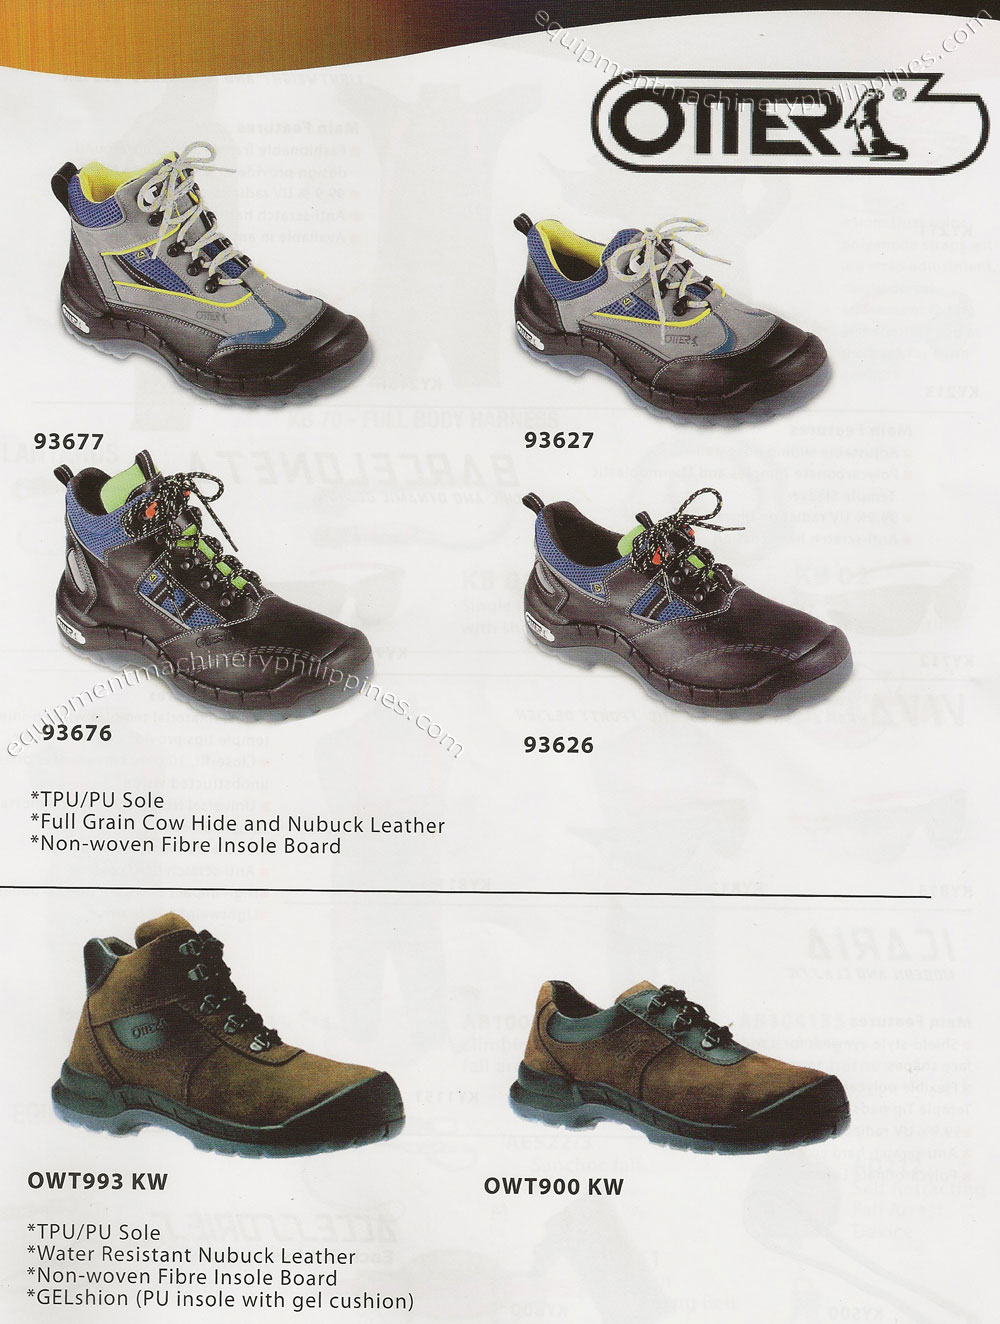 Otter Safety Shoes